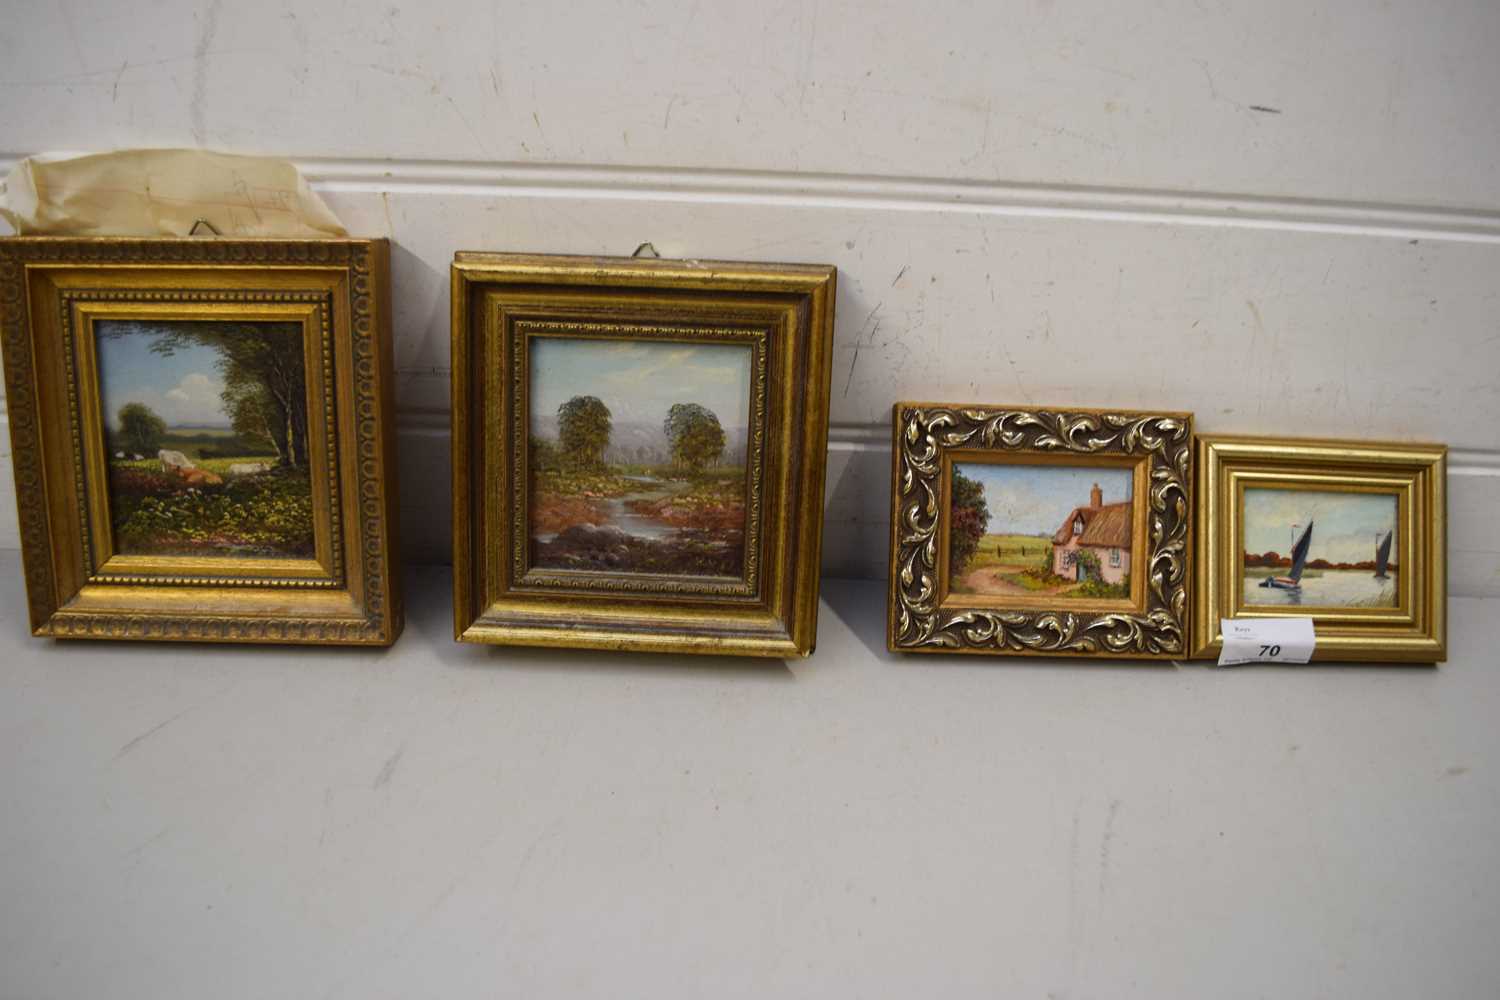 SPENCER STOCK, TWO SMALL OIL ON COPPER STUDIES, RURAL SCENES IN GILT FRAMES, TOGETHER WITH TWO